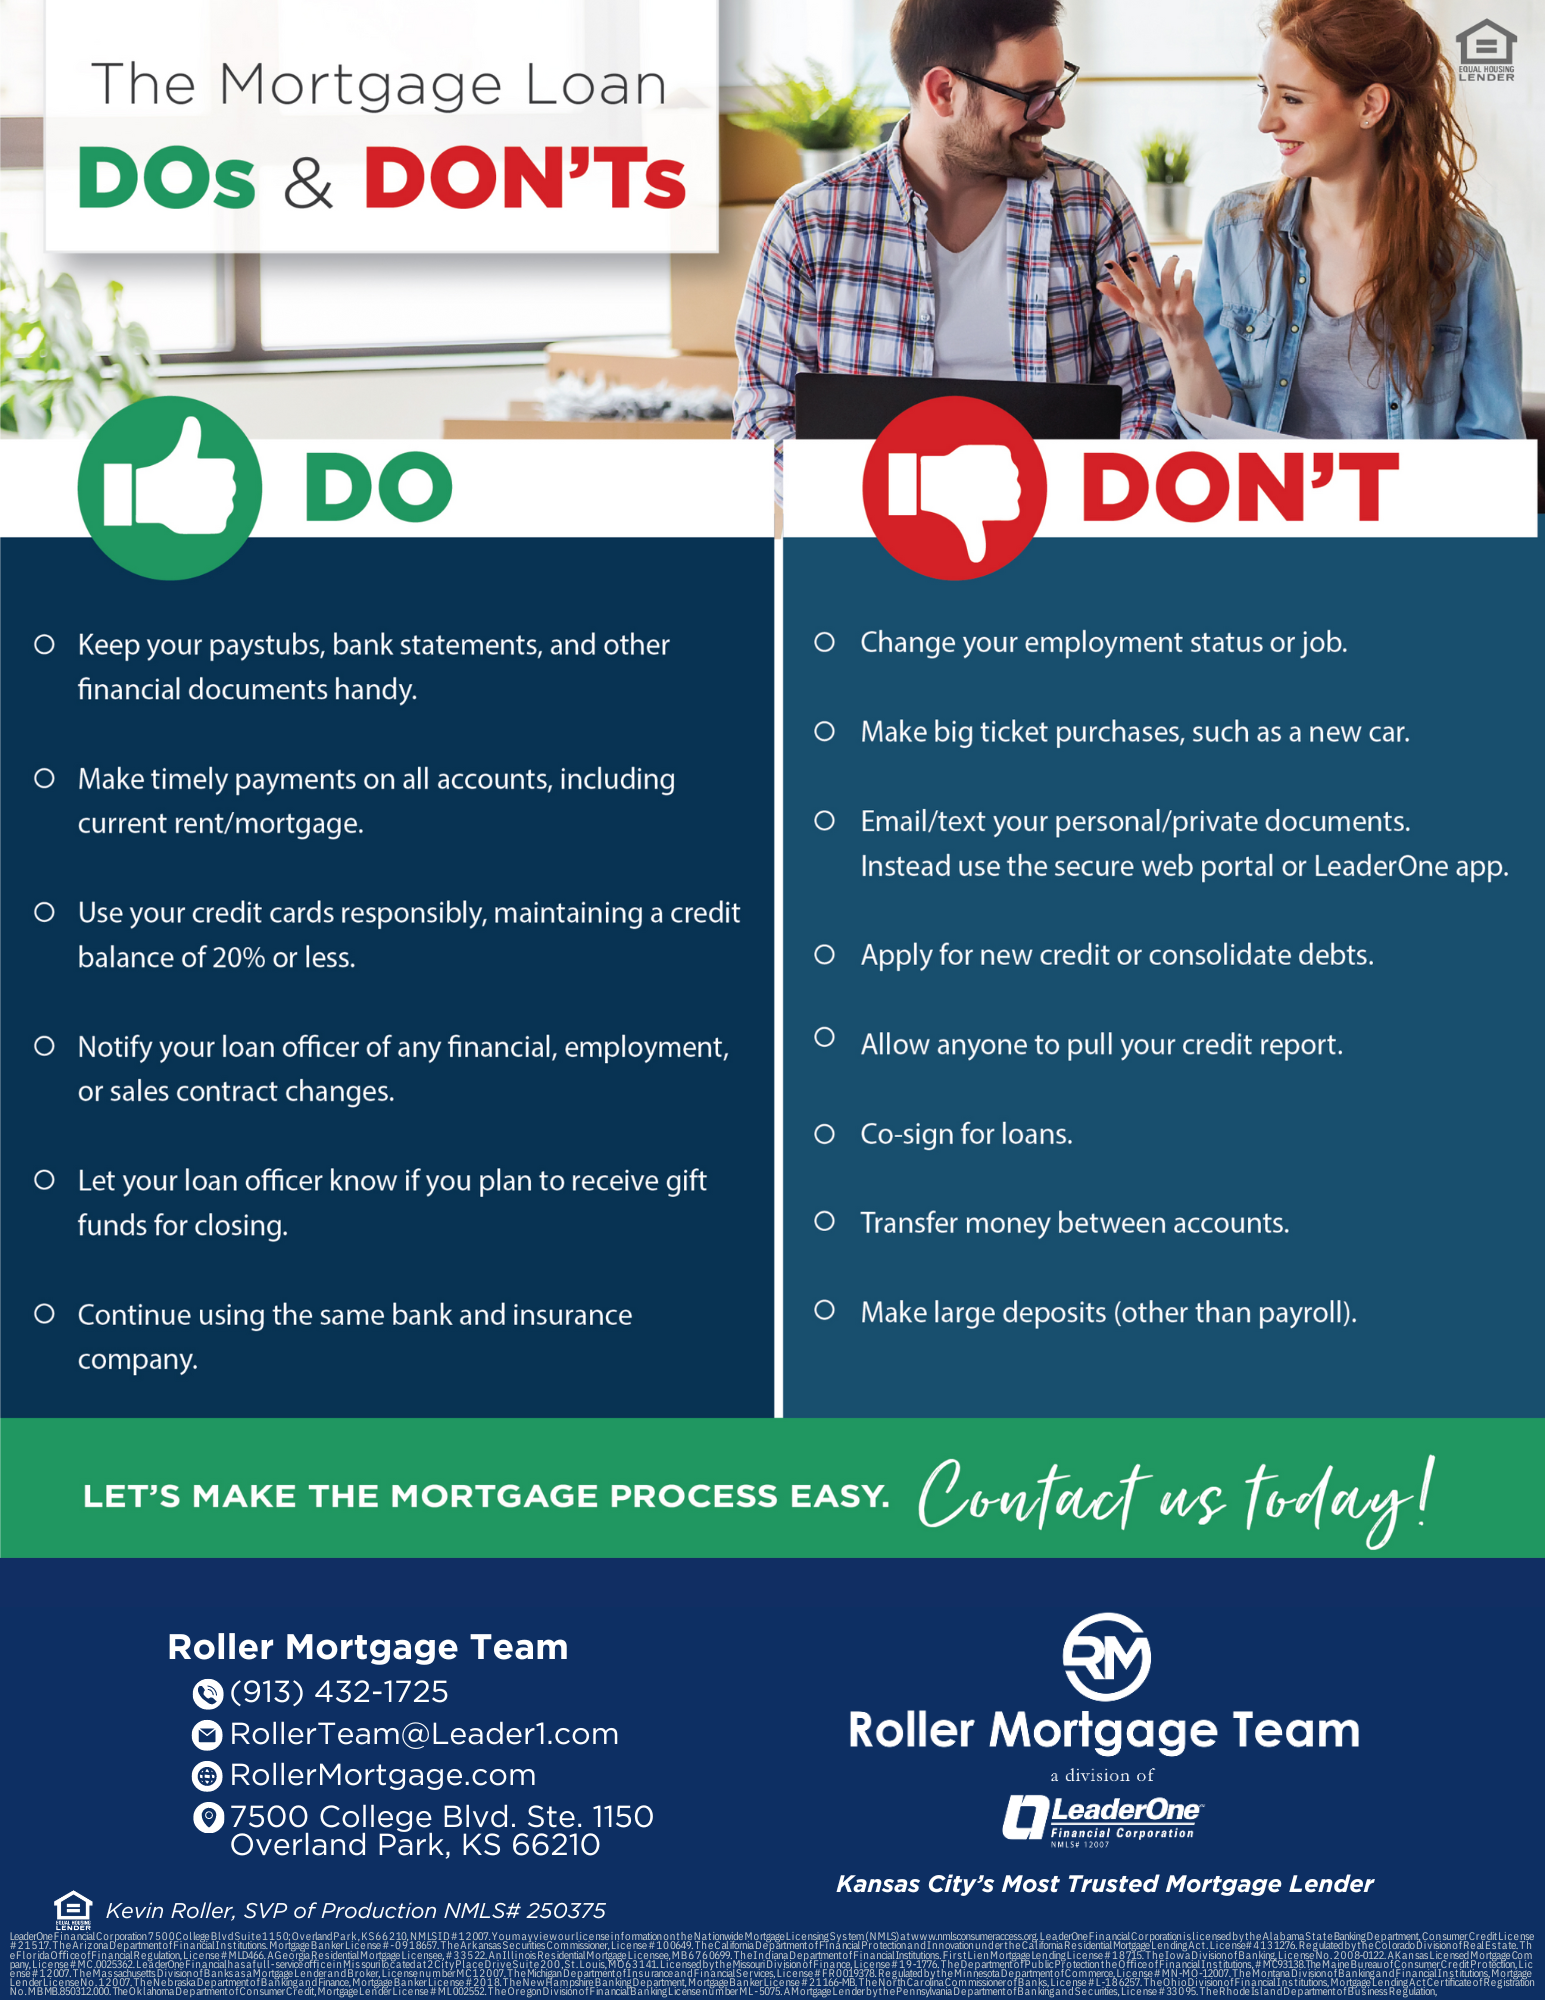 Mortgage Do's & Don't's